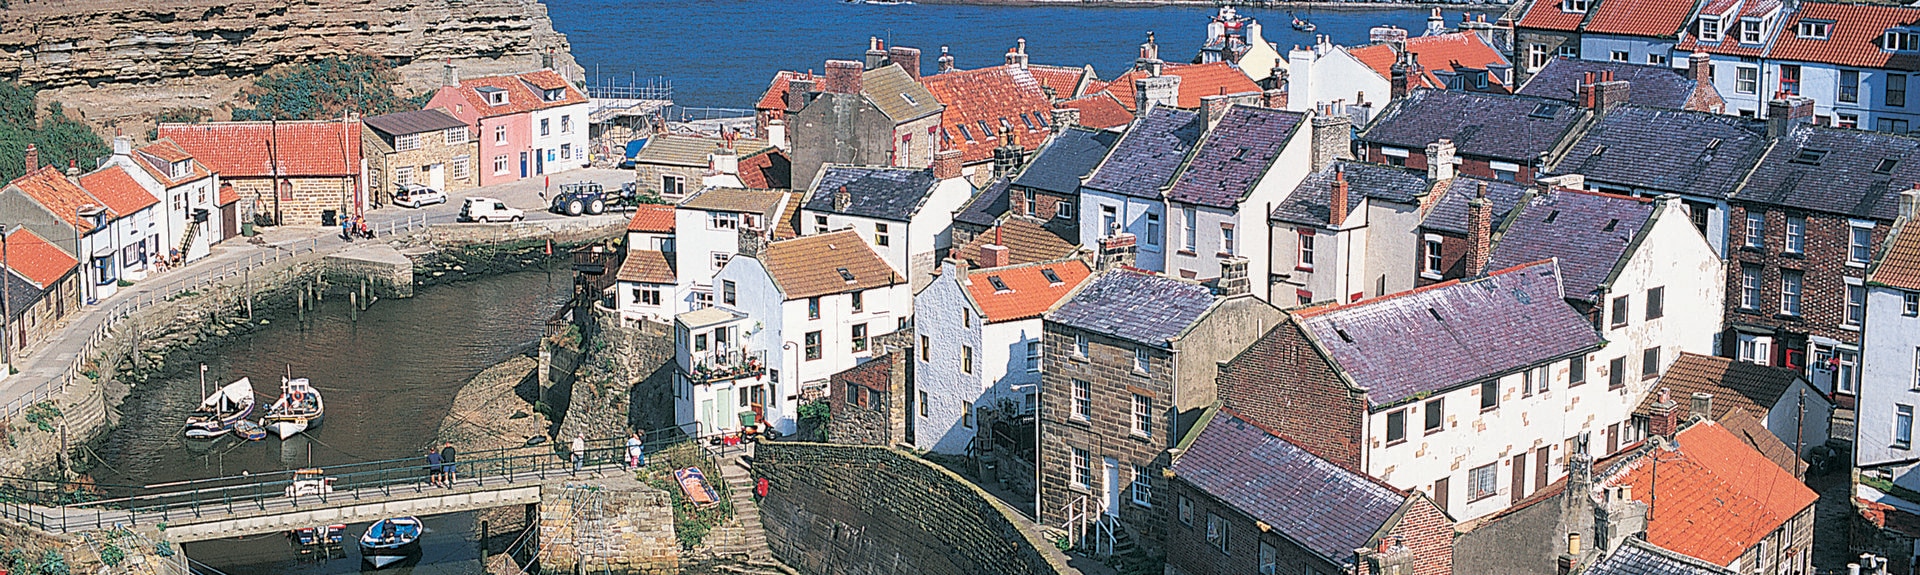 dog friendly cottages in north yorkshire coast